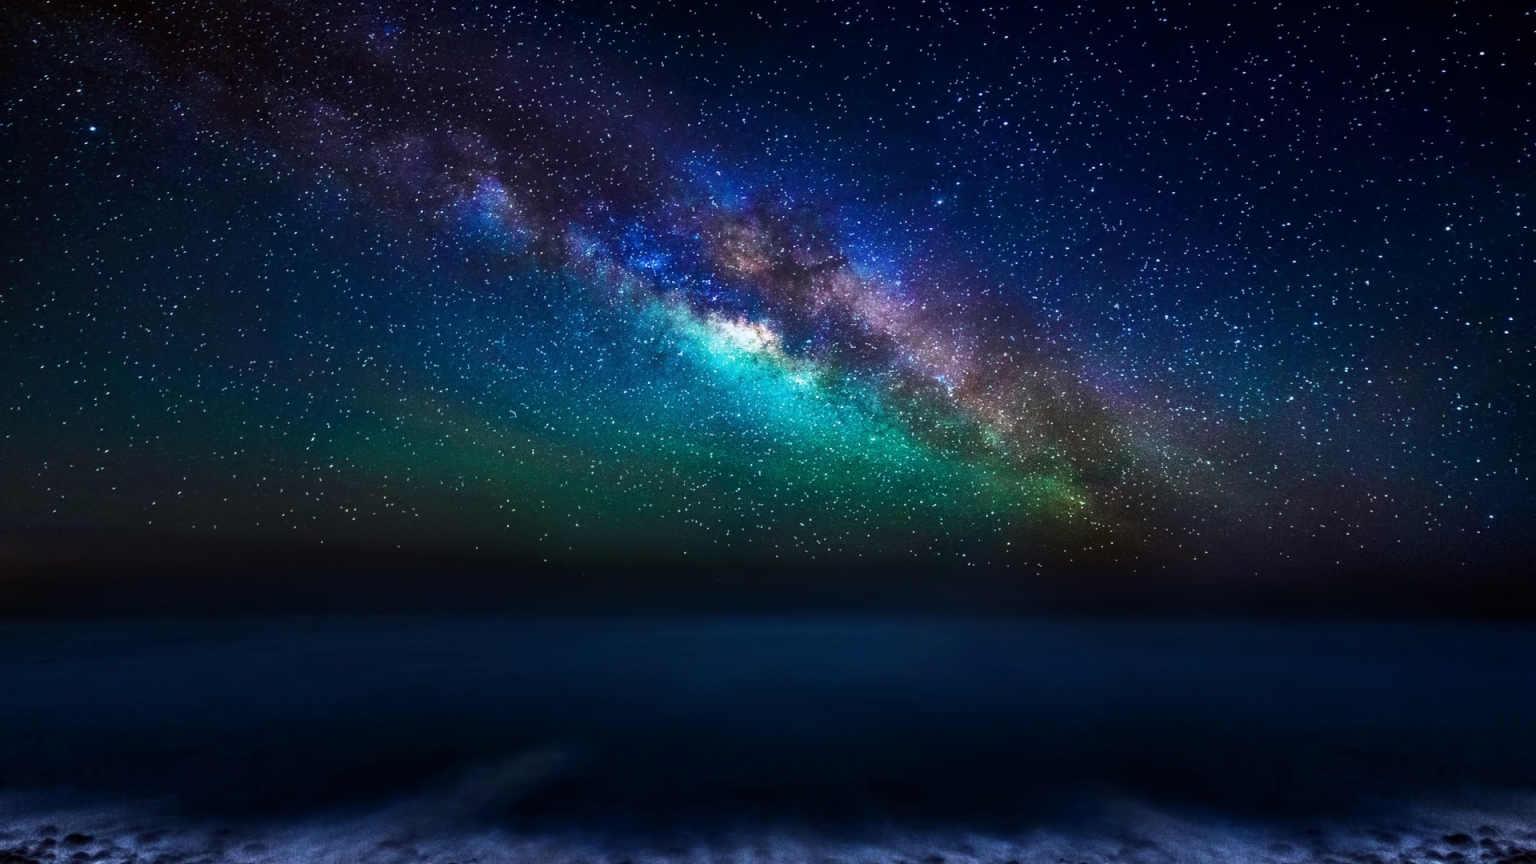 Milky Way Galaxy from the Canary Islands for 1536 x 864 HDTV resolution